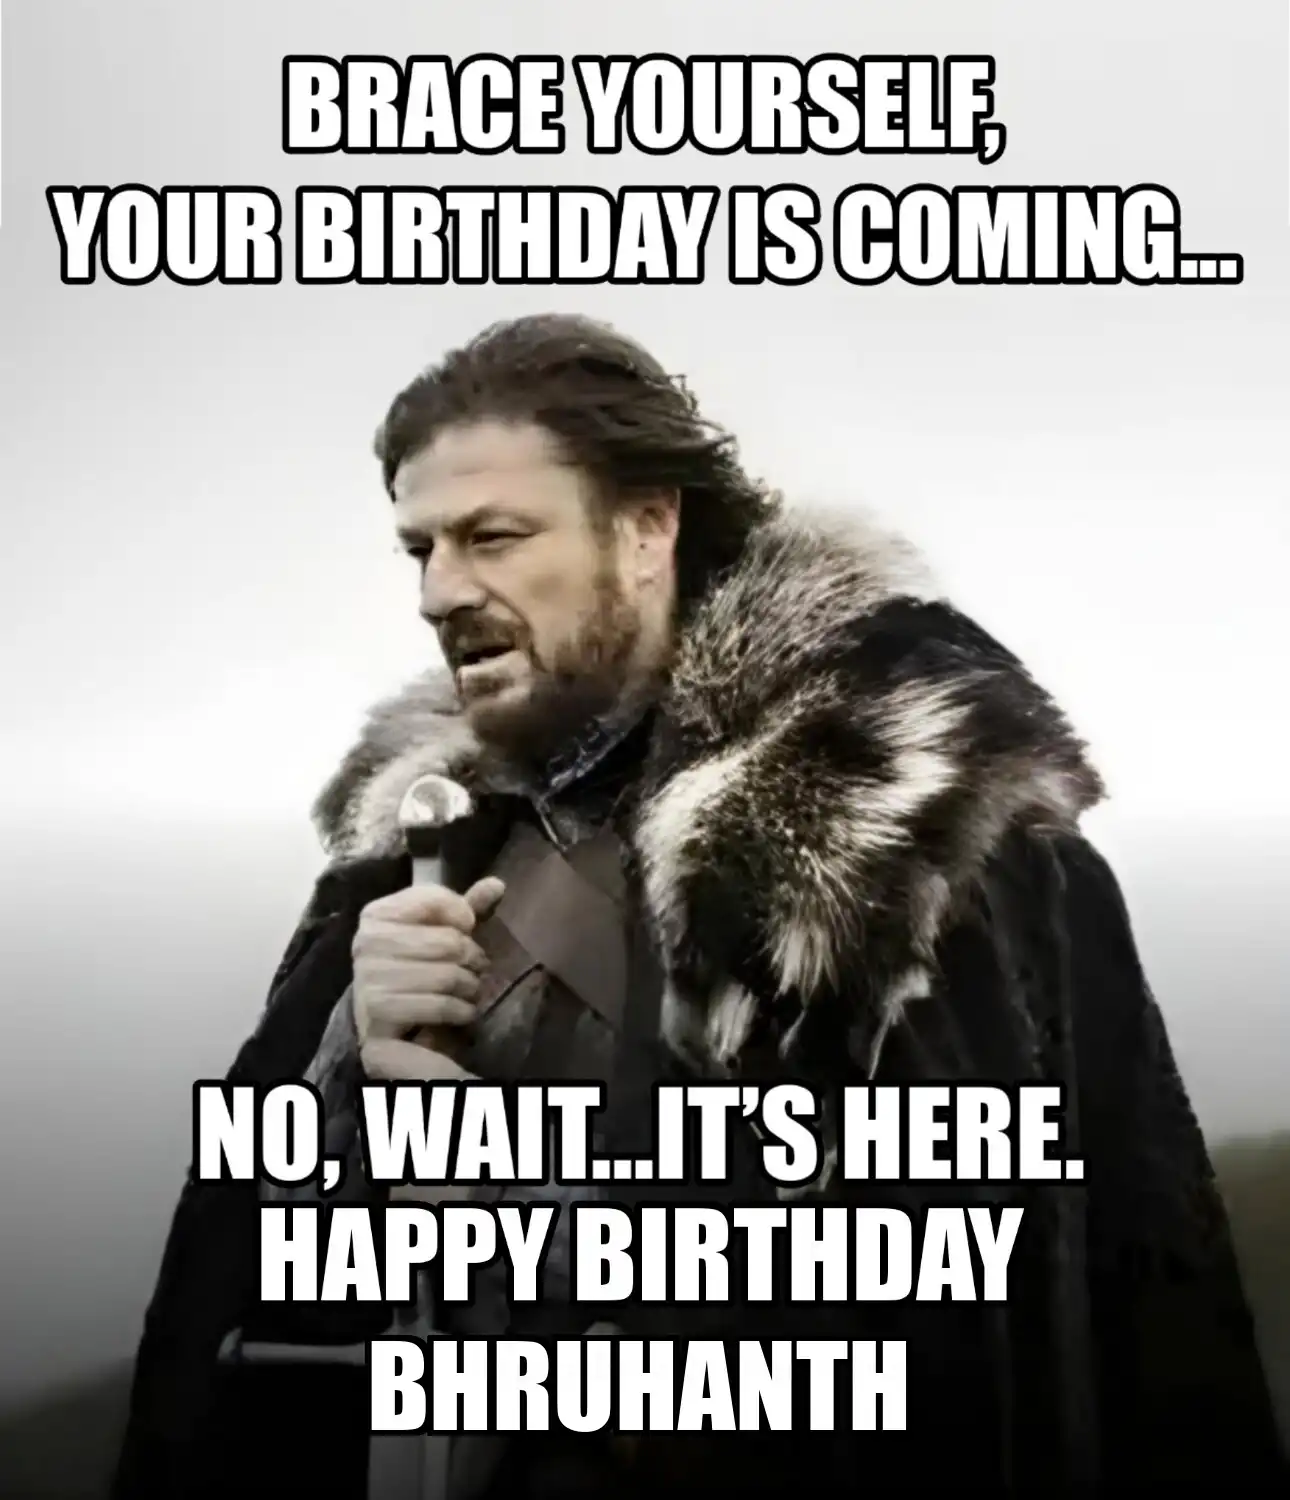 Happy Birthday Bhruhanth Brace Yourself Your Birthday Is Coming Meme